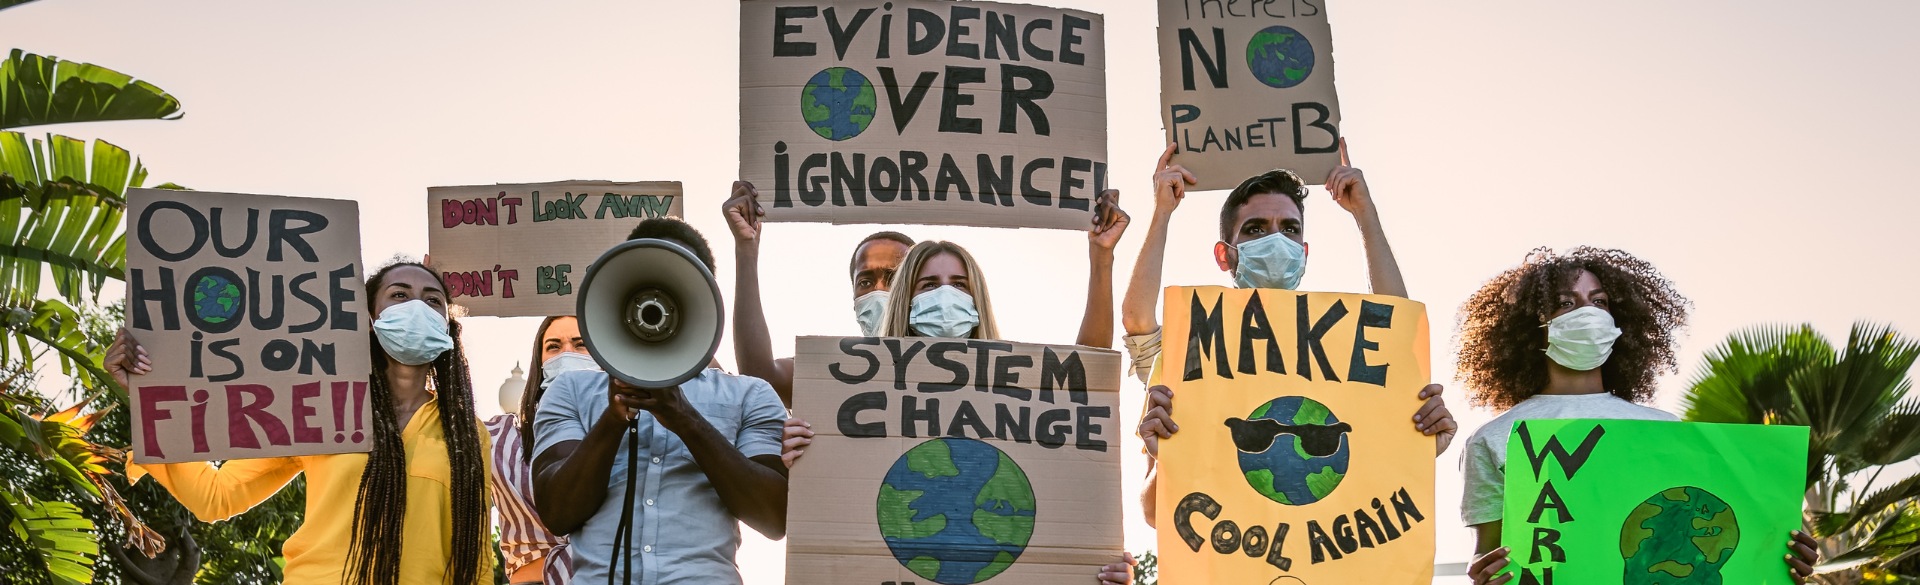 Climate change protestors holding signs